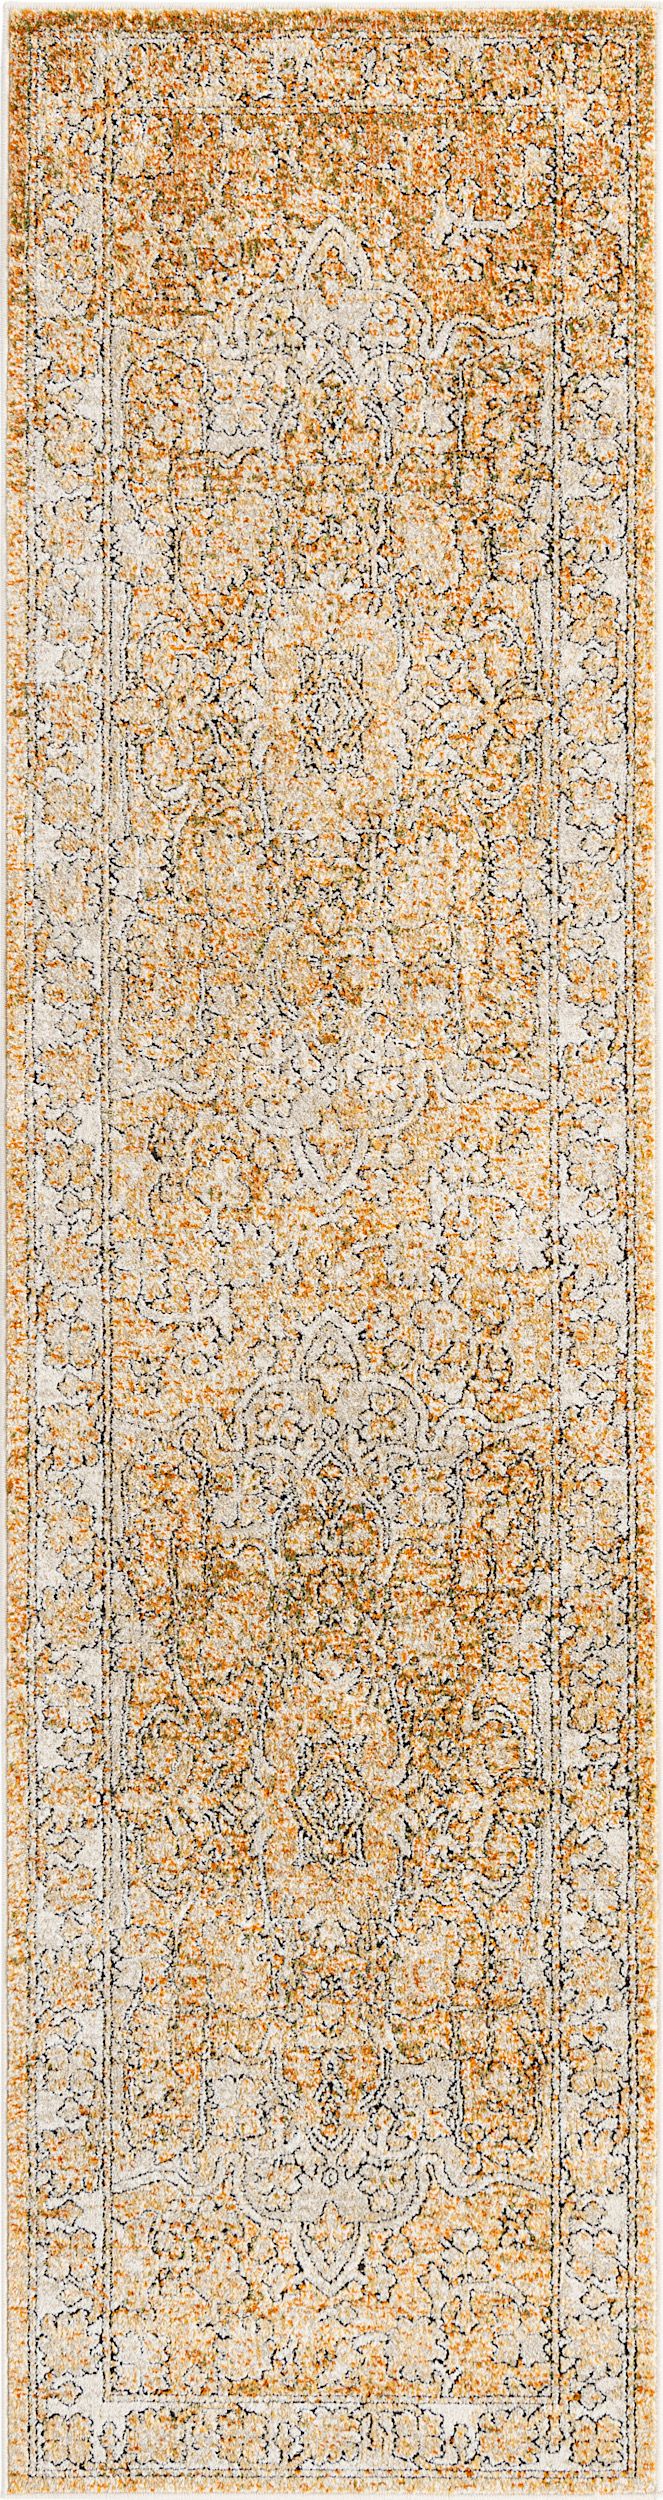 rugpal charian traditional area rug collection